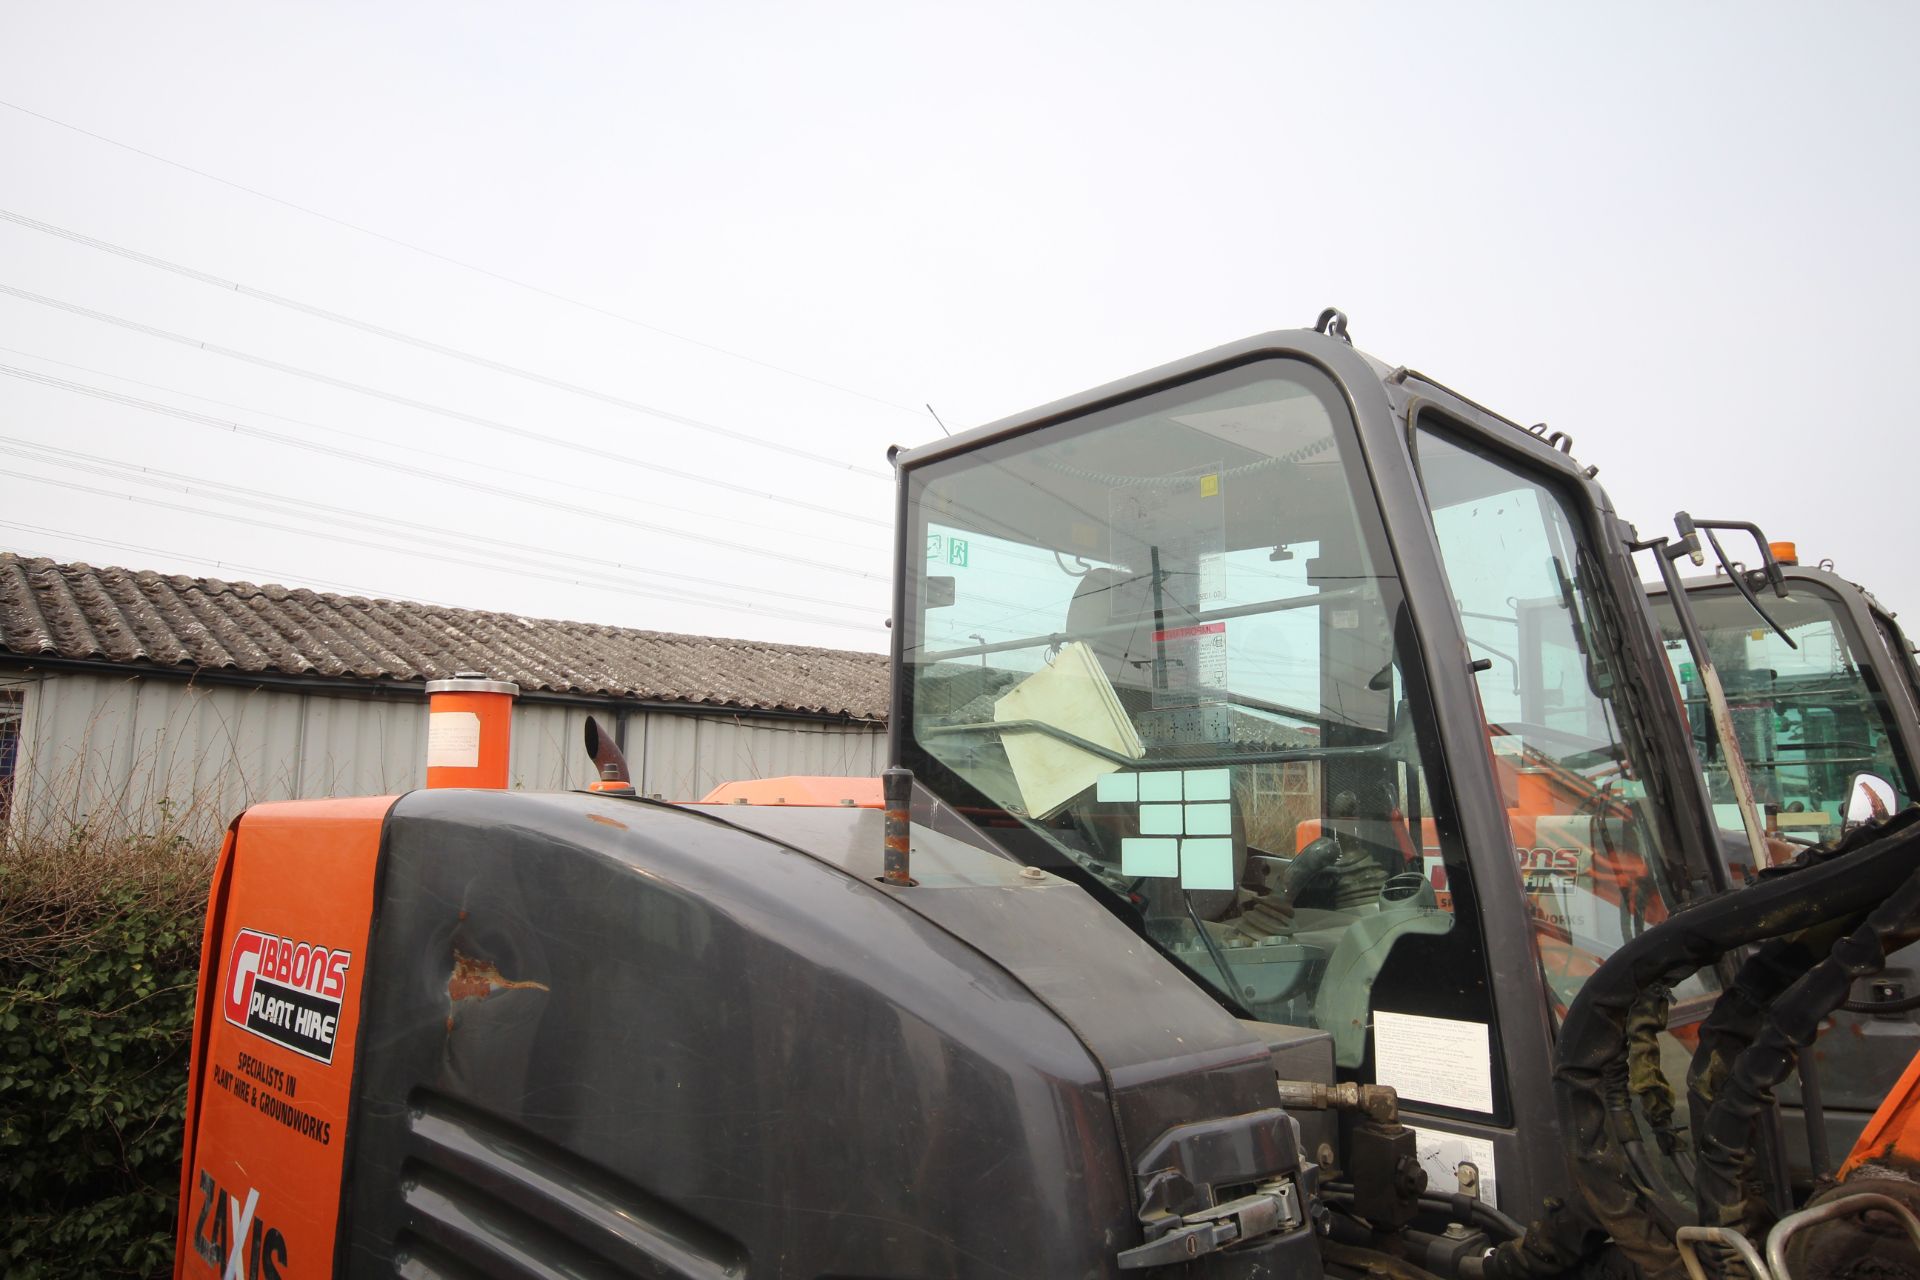 Hitachi Z-Axis 85-USB-5A 8.5T rubber track excavator. 2016. 4,704 hours. Serial number HCM DEE50K - Image 20 of 75